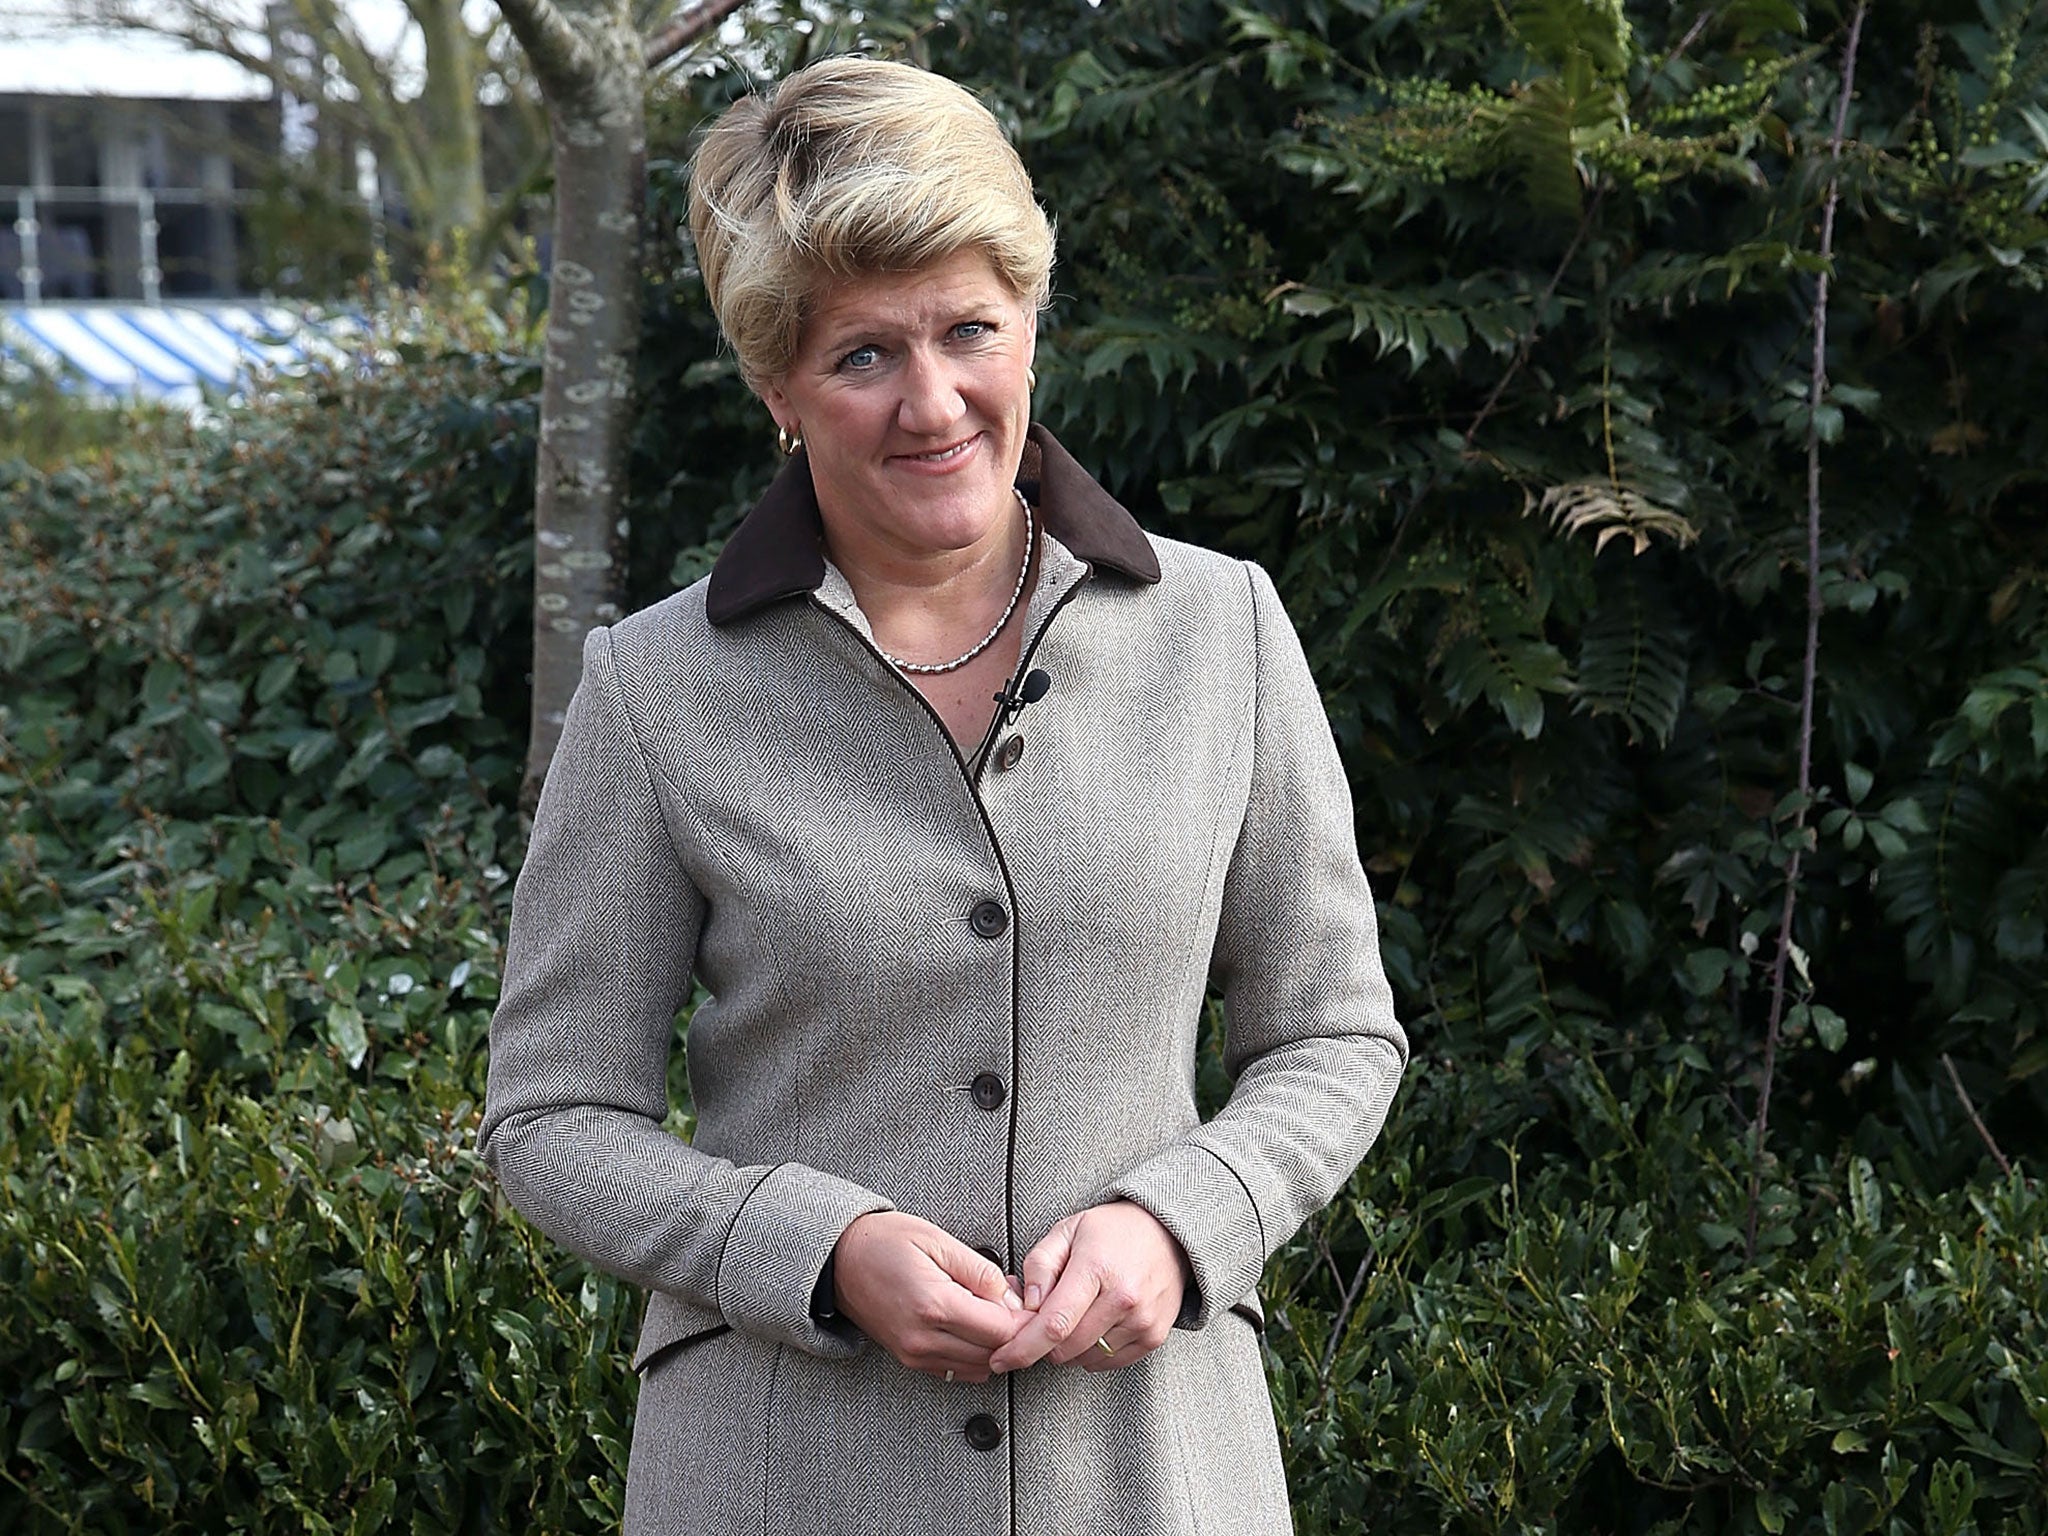 Clare Balding is taking over from John Inverdale